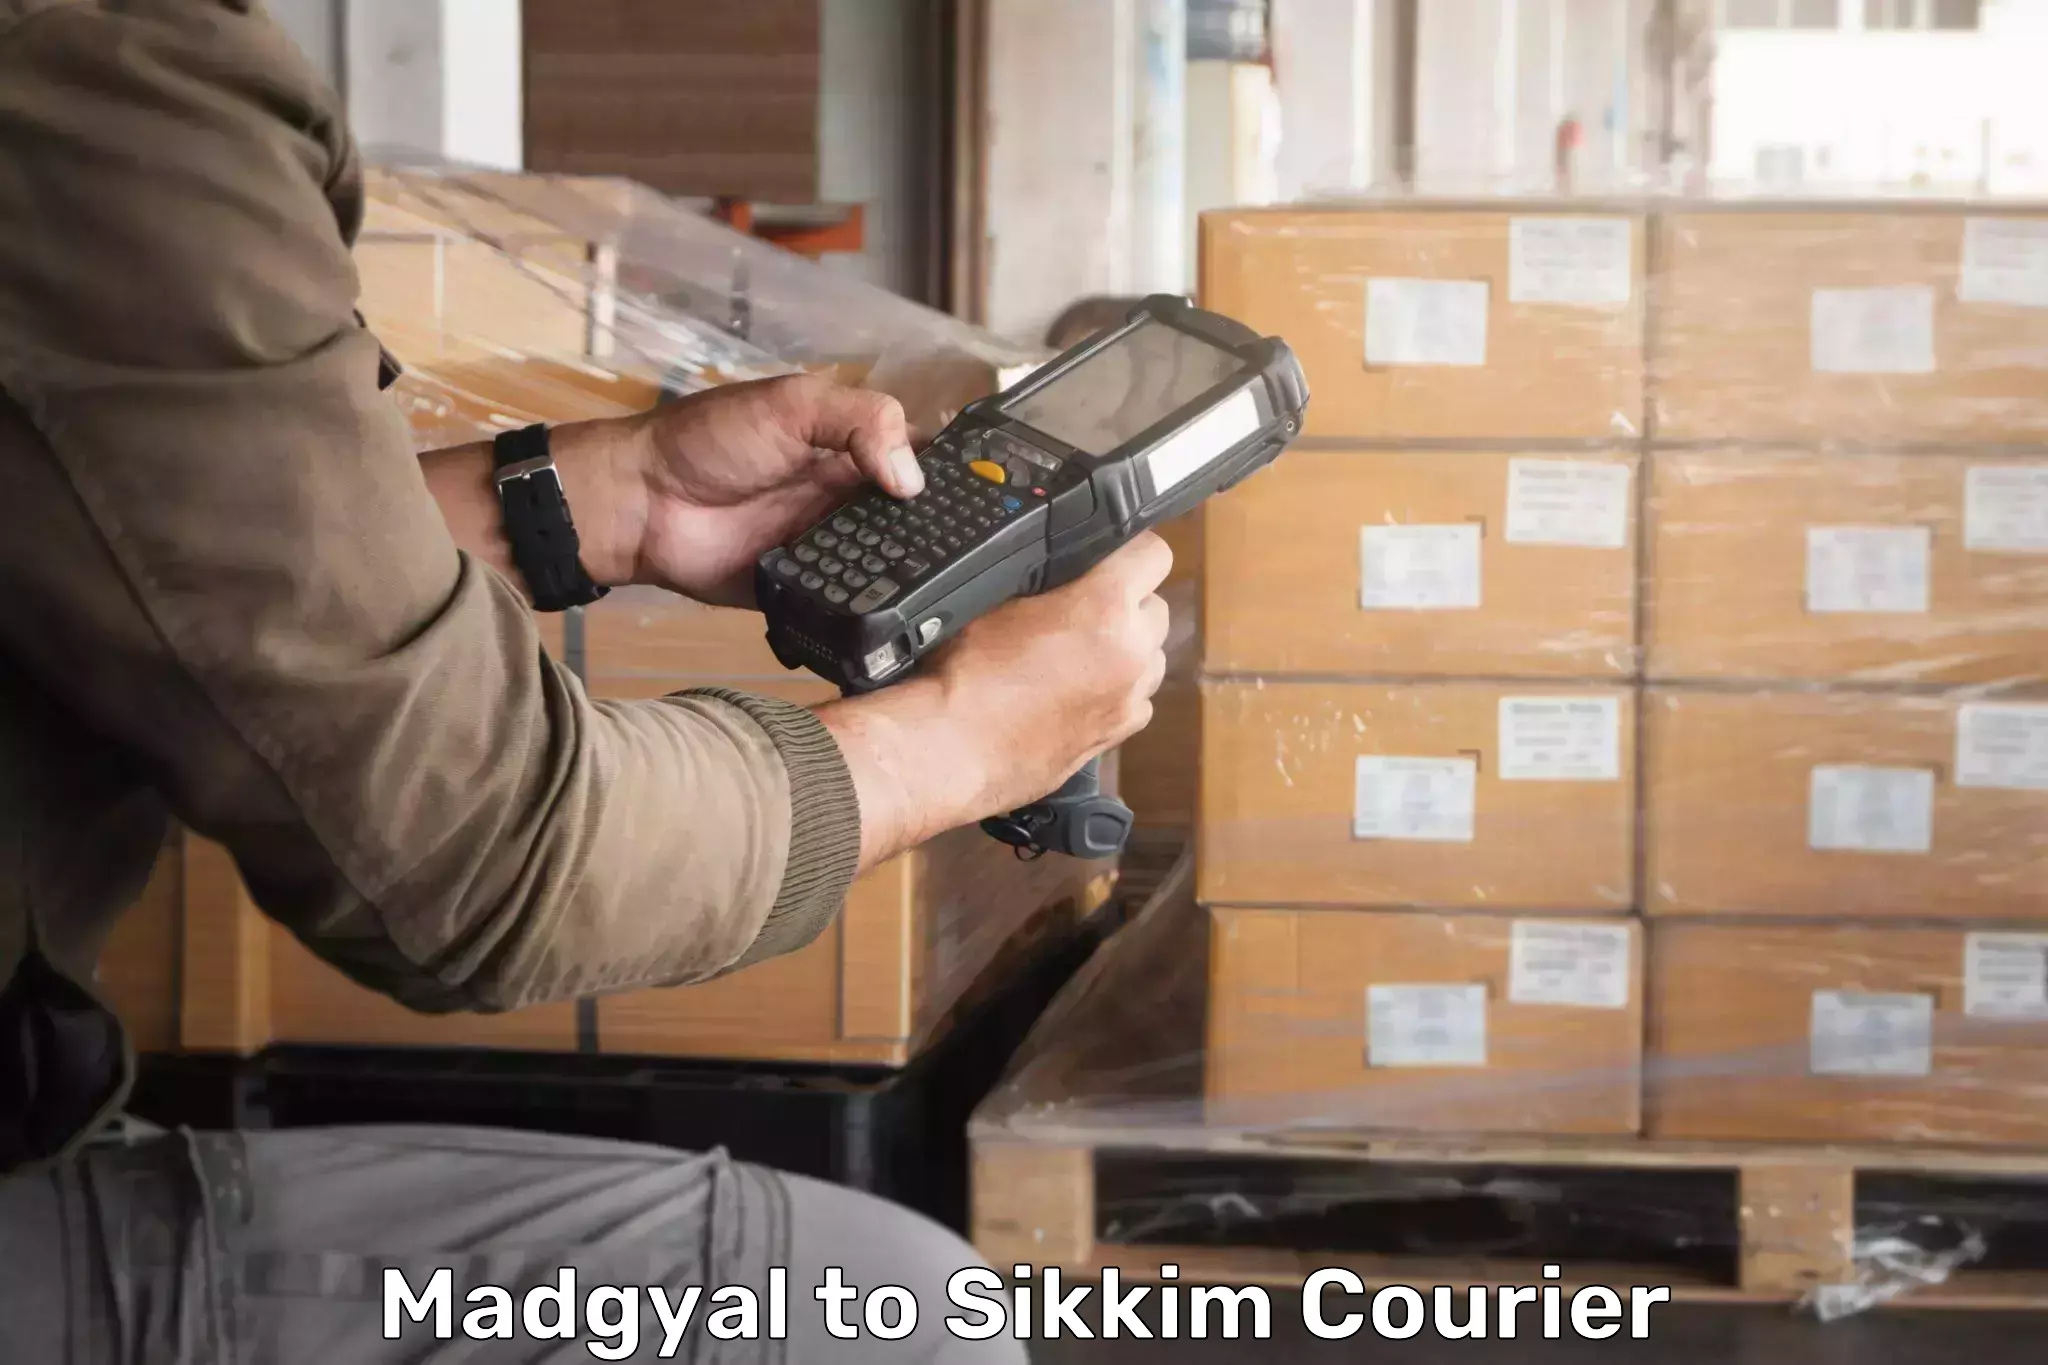 International courier networks Madgyal to Sikkim